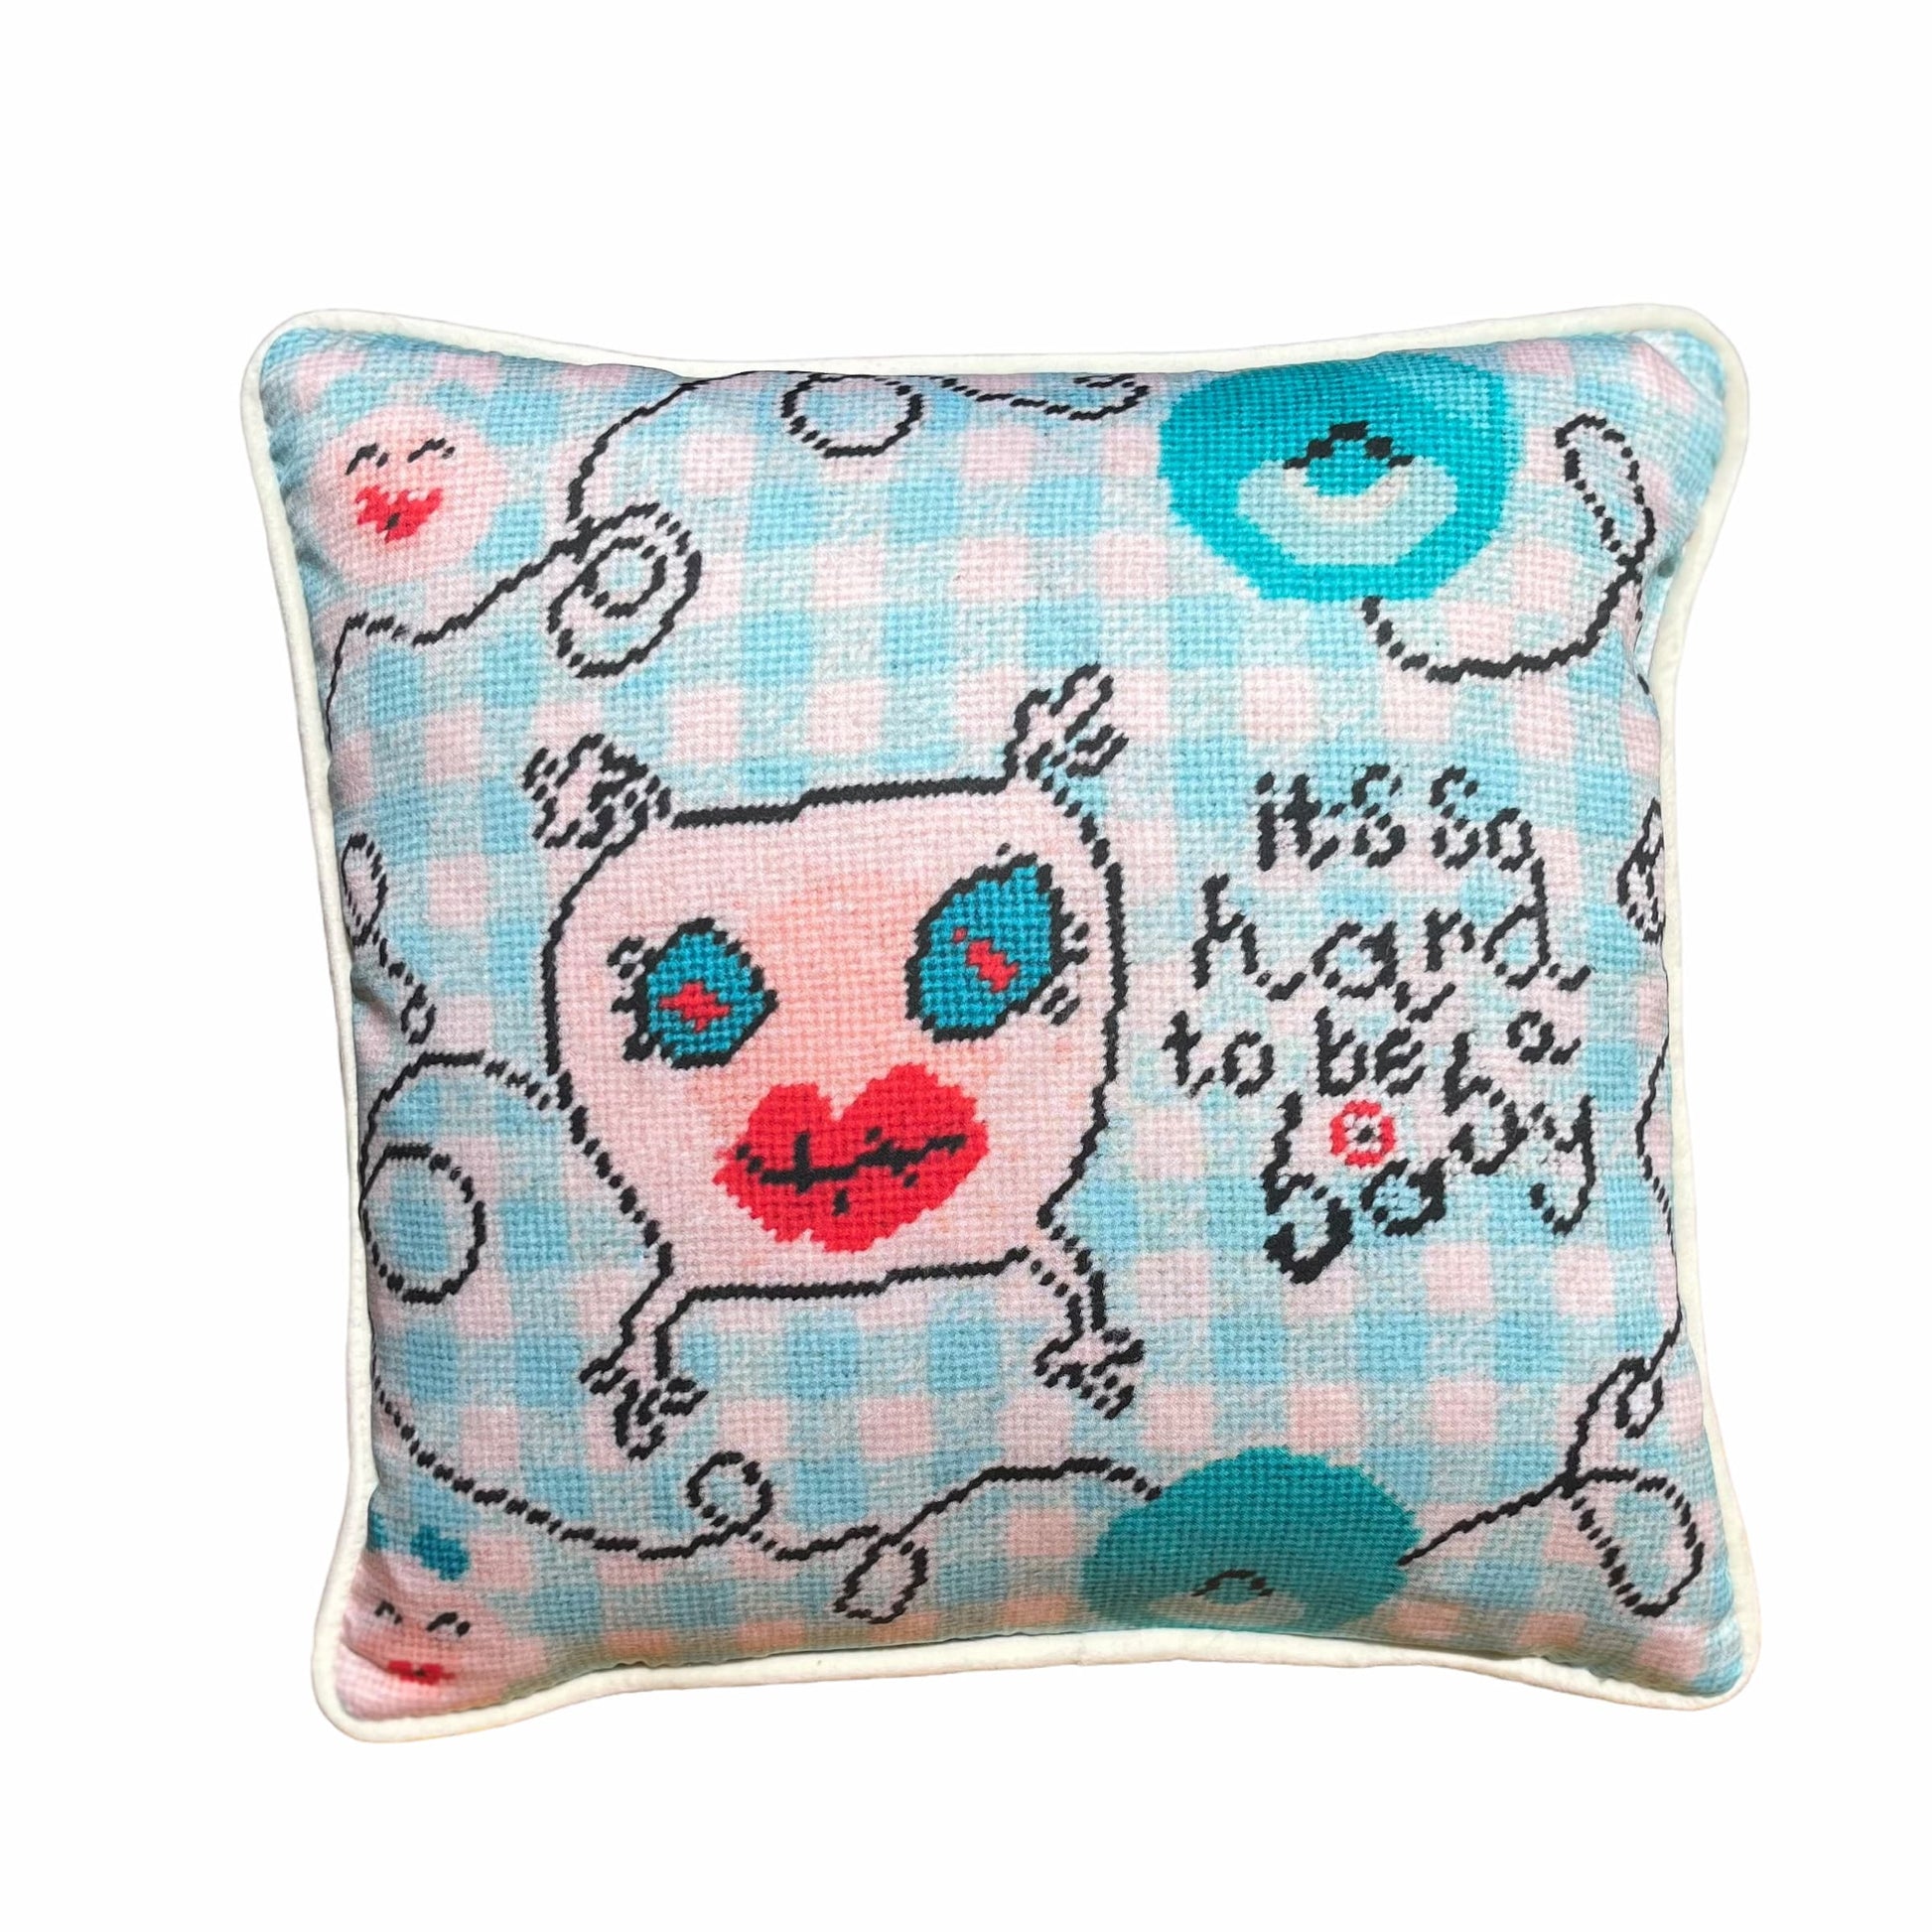 sweet monster pillow with big blue eyes & big red lips on baby blue checked background; says It's so hard to be a baby